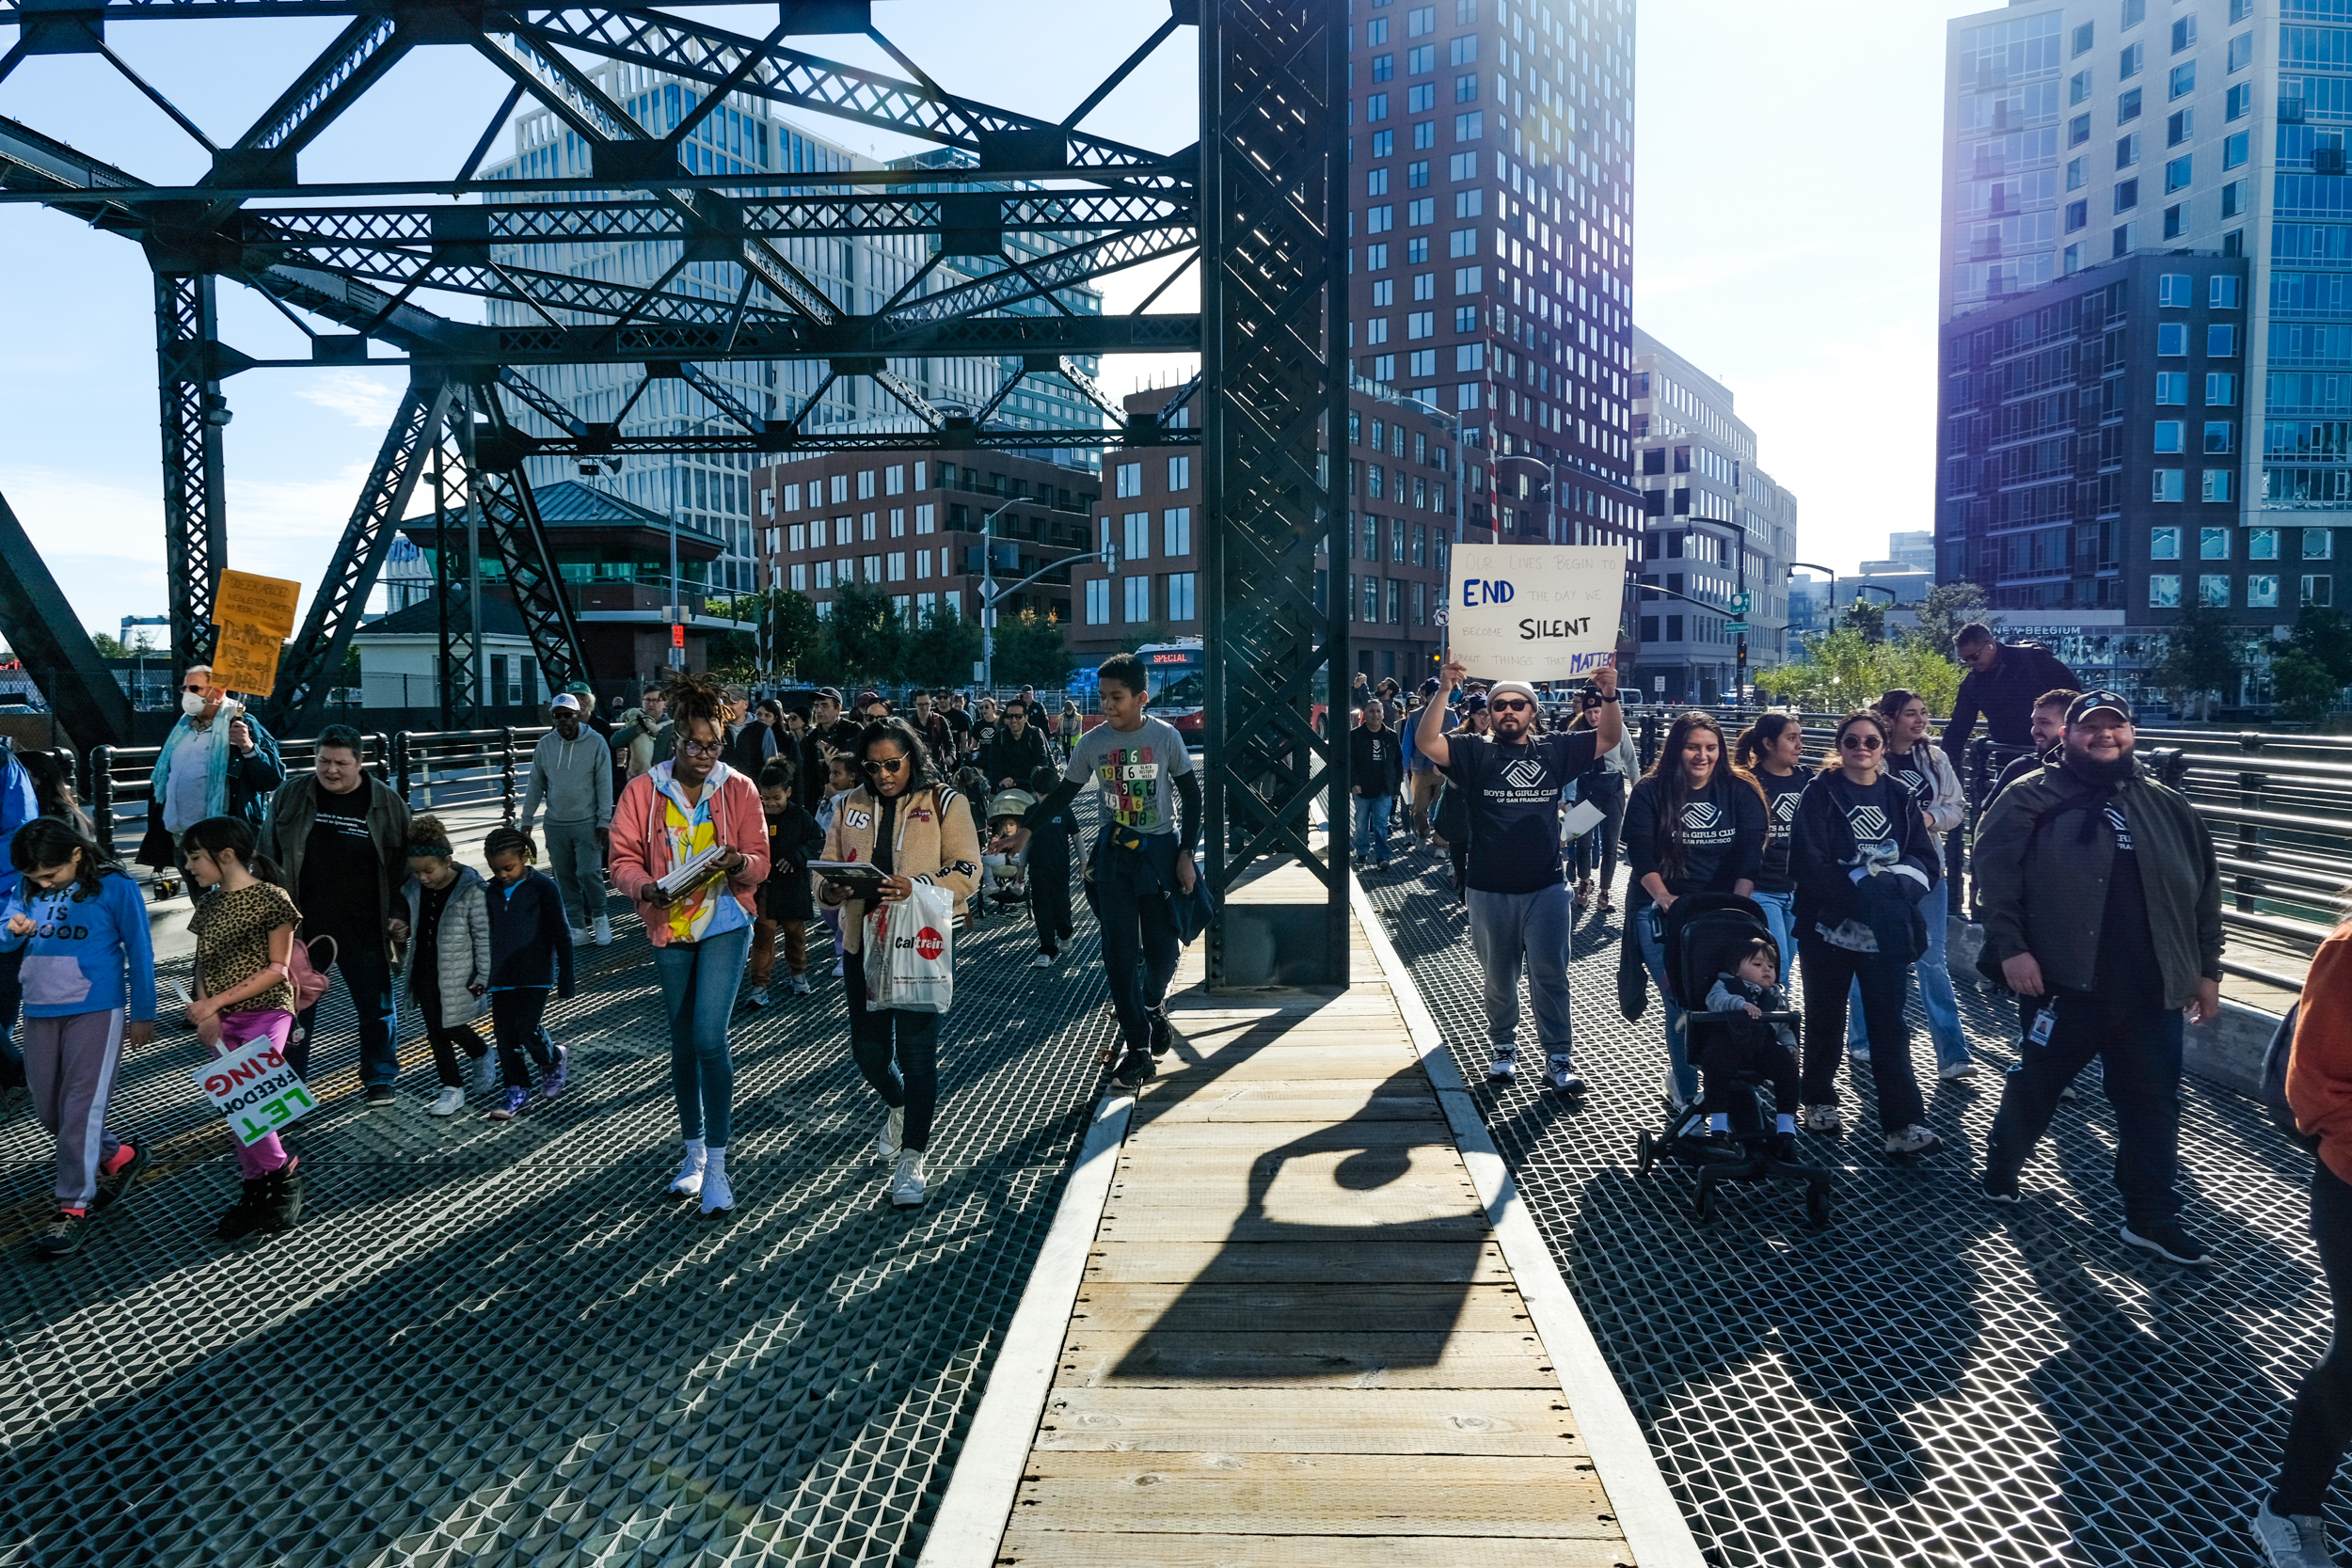 A diverse crowd walks across a metal bridge in a city, some holding signs, with urban buildings in the background.